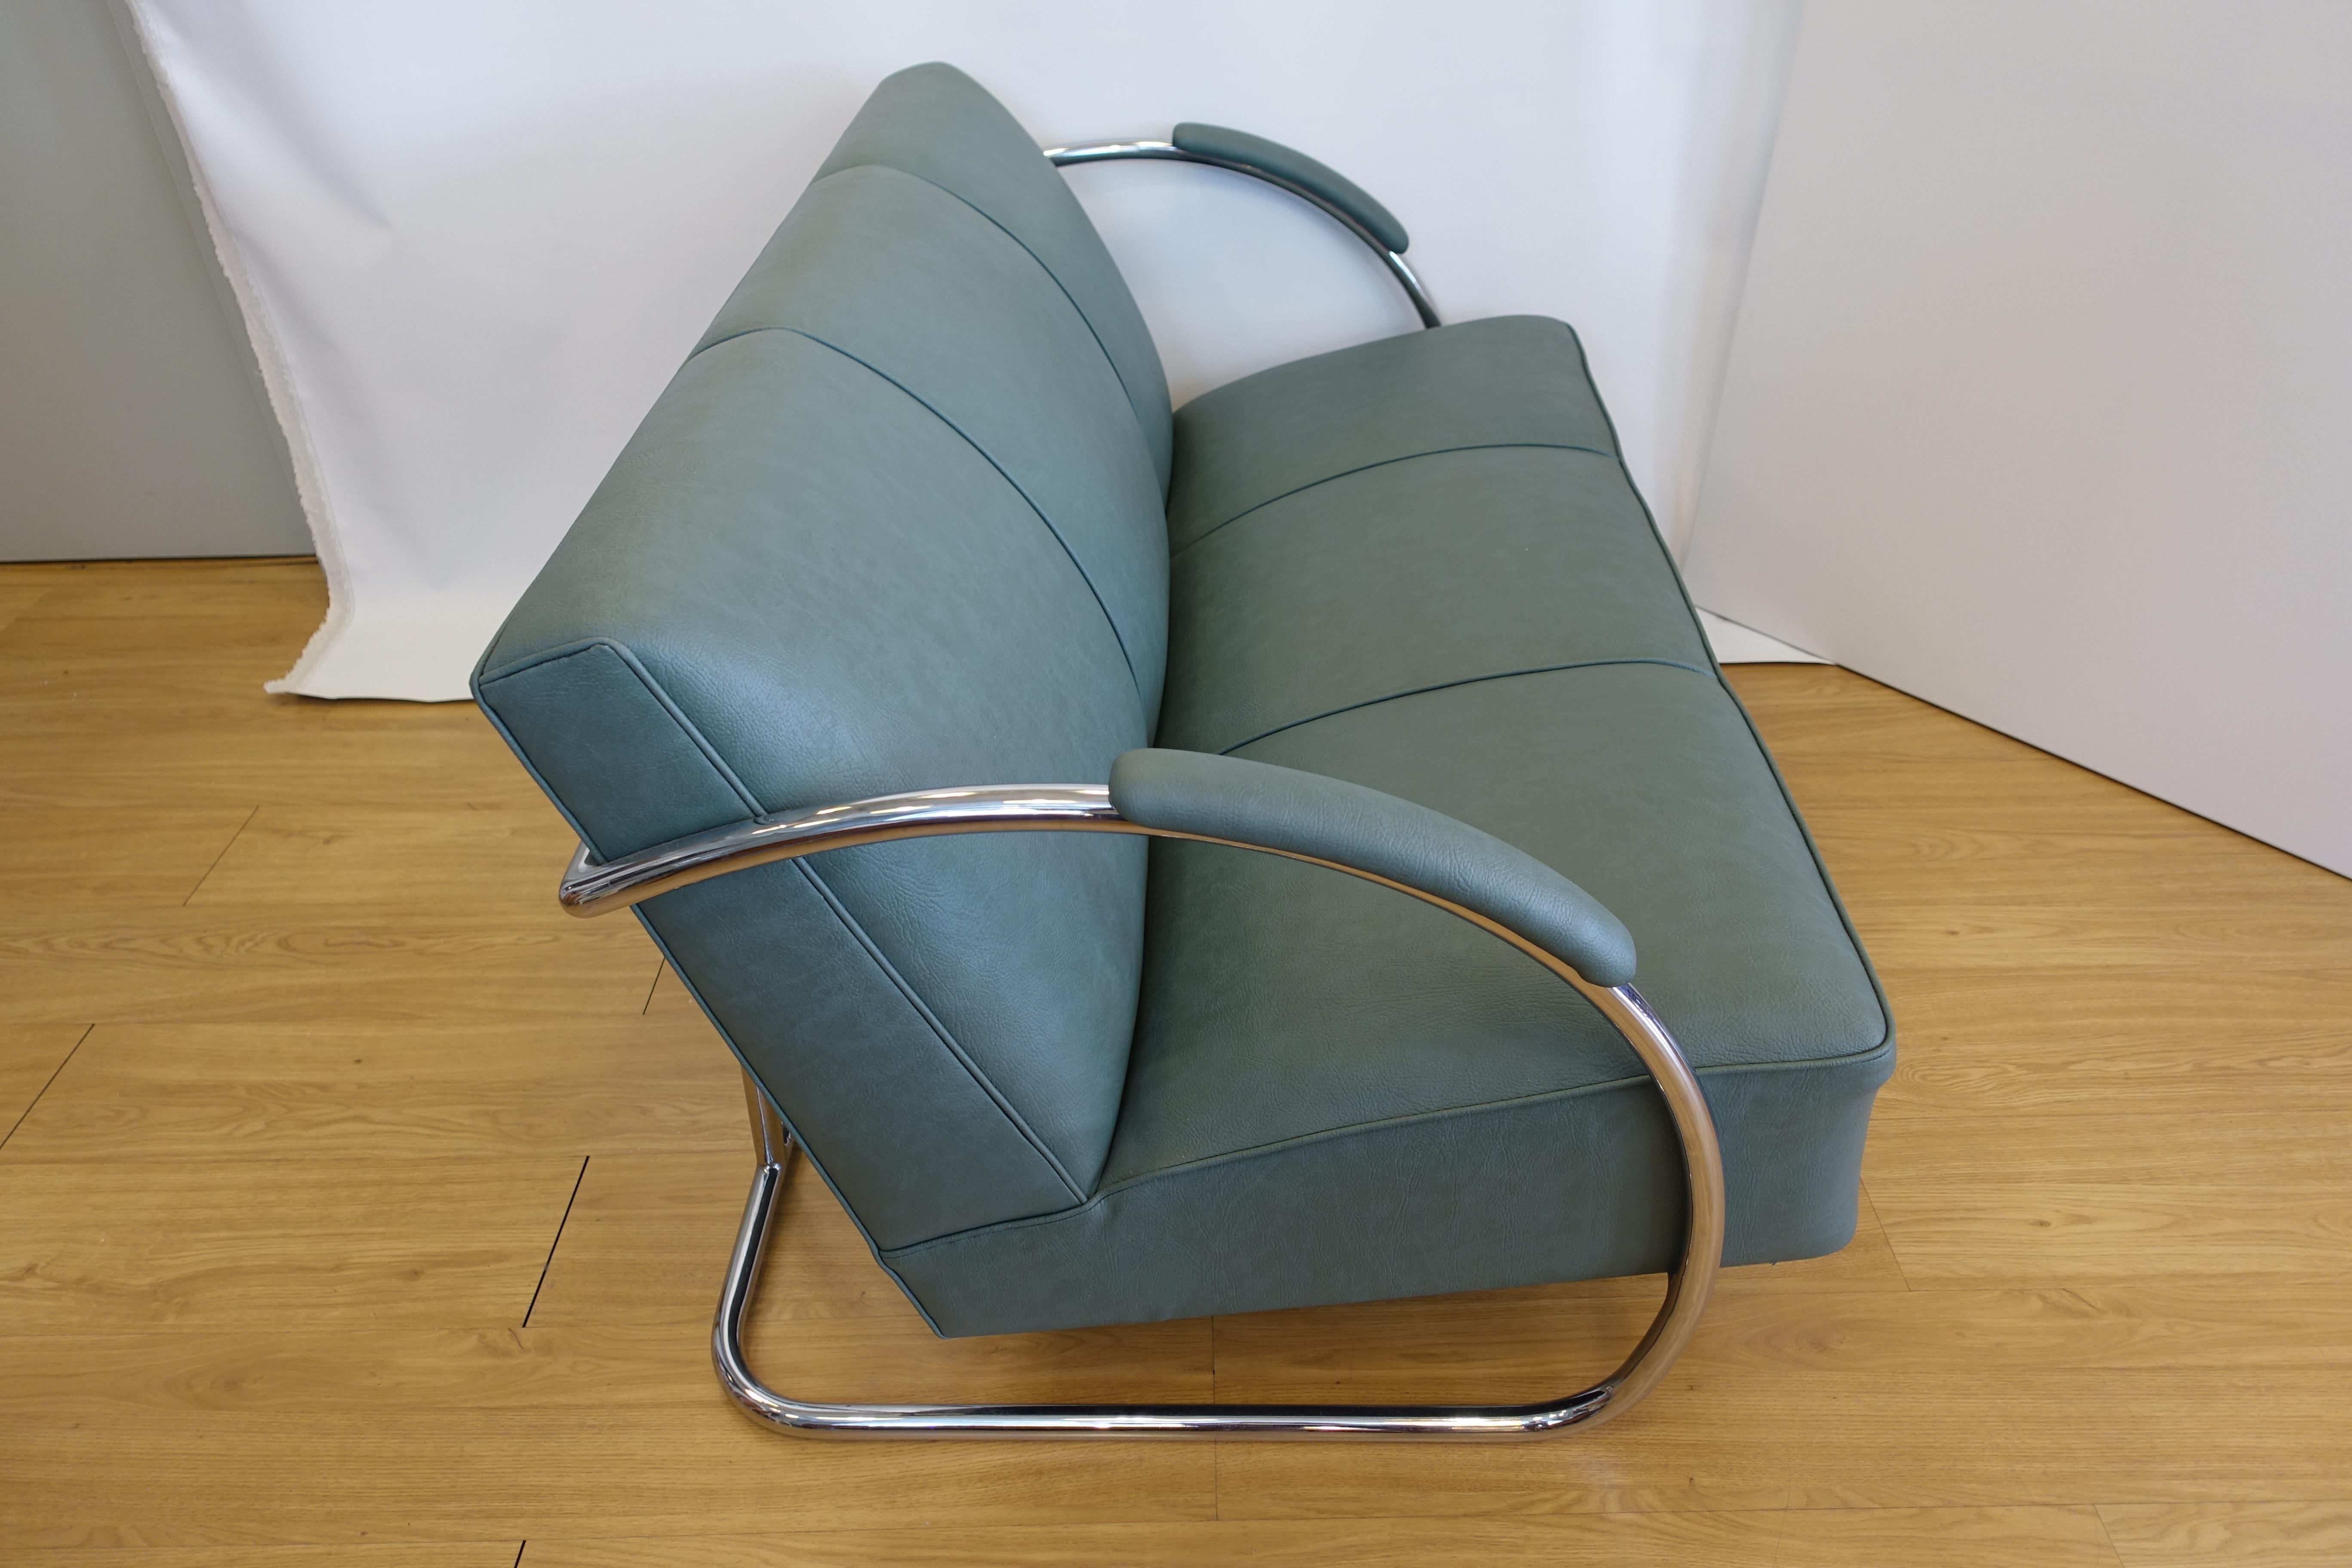 Streamlined Moderne Streamline Chromed Steel and Green Synthetic Leather Sofa, 1930s